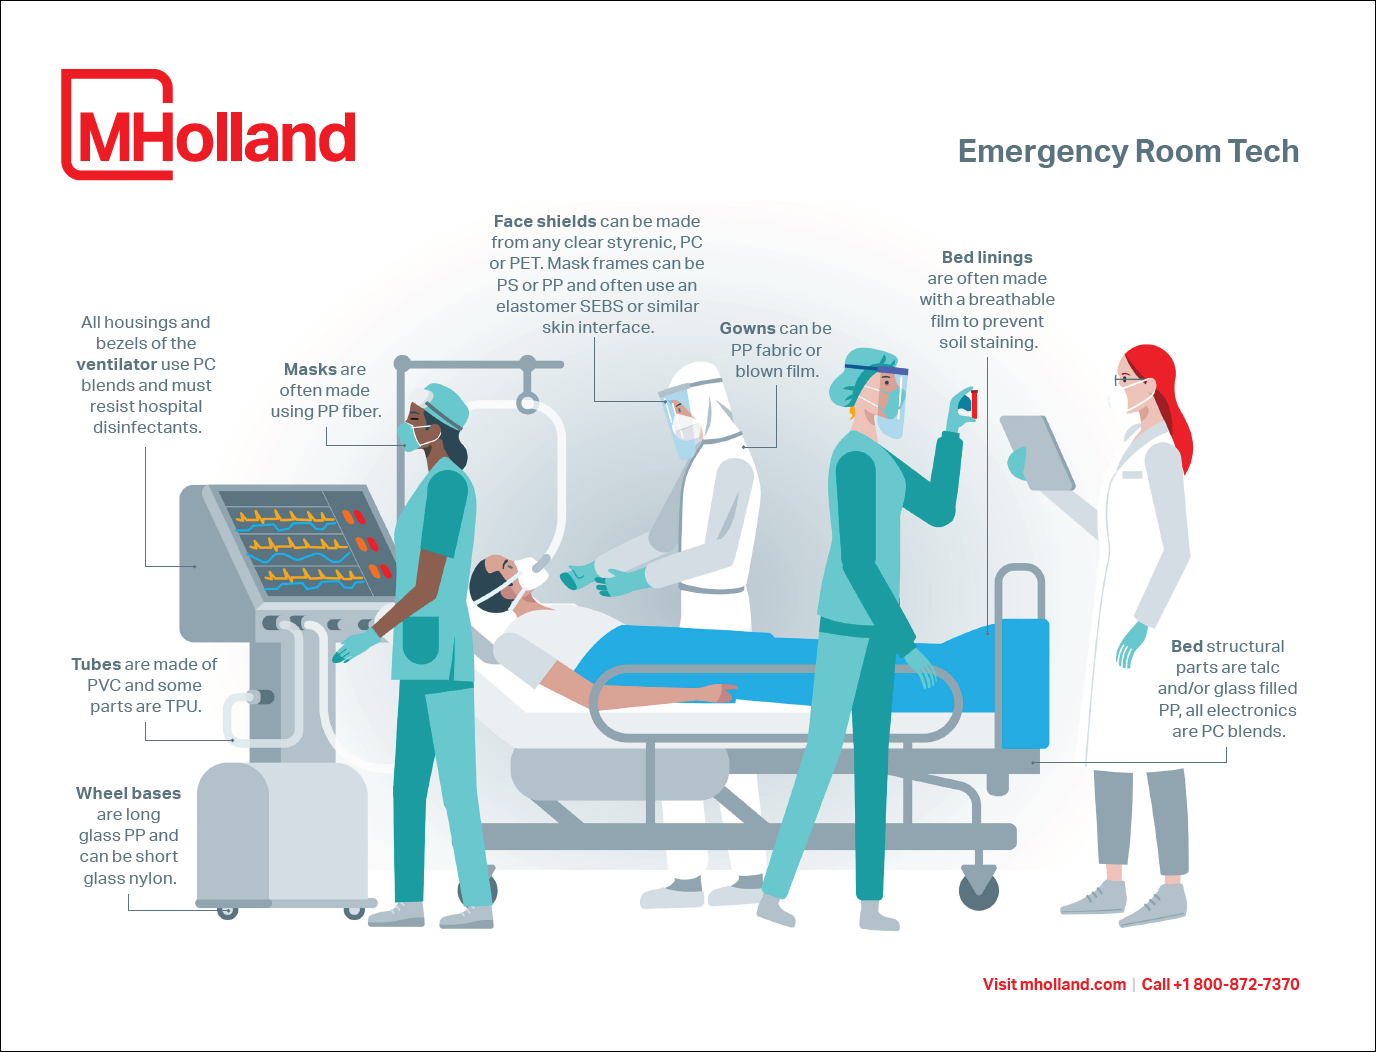 M. Holland Emergency Room Tech Infographic